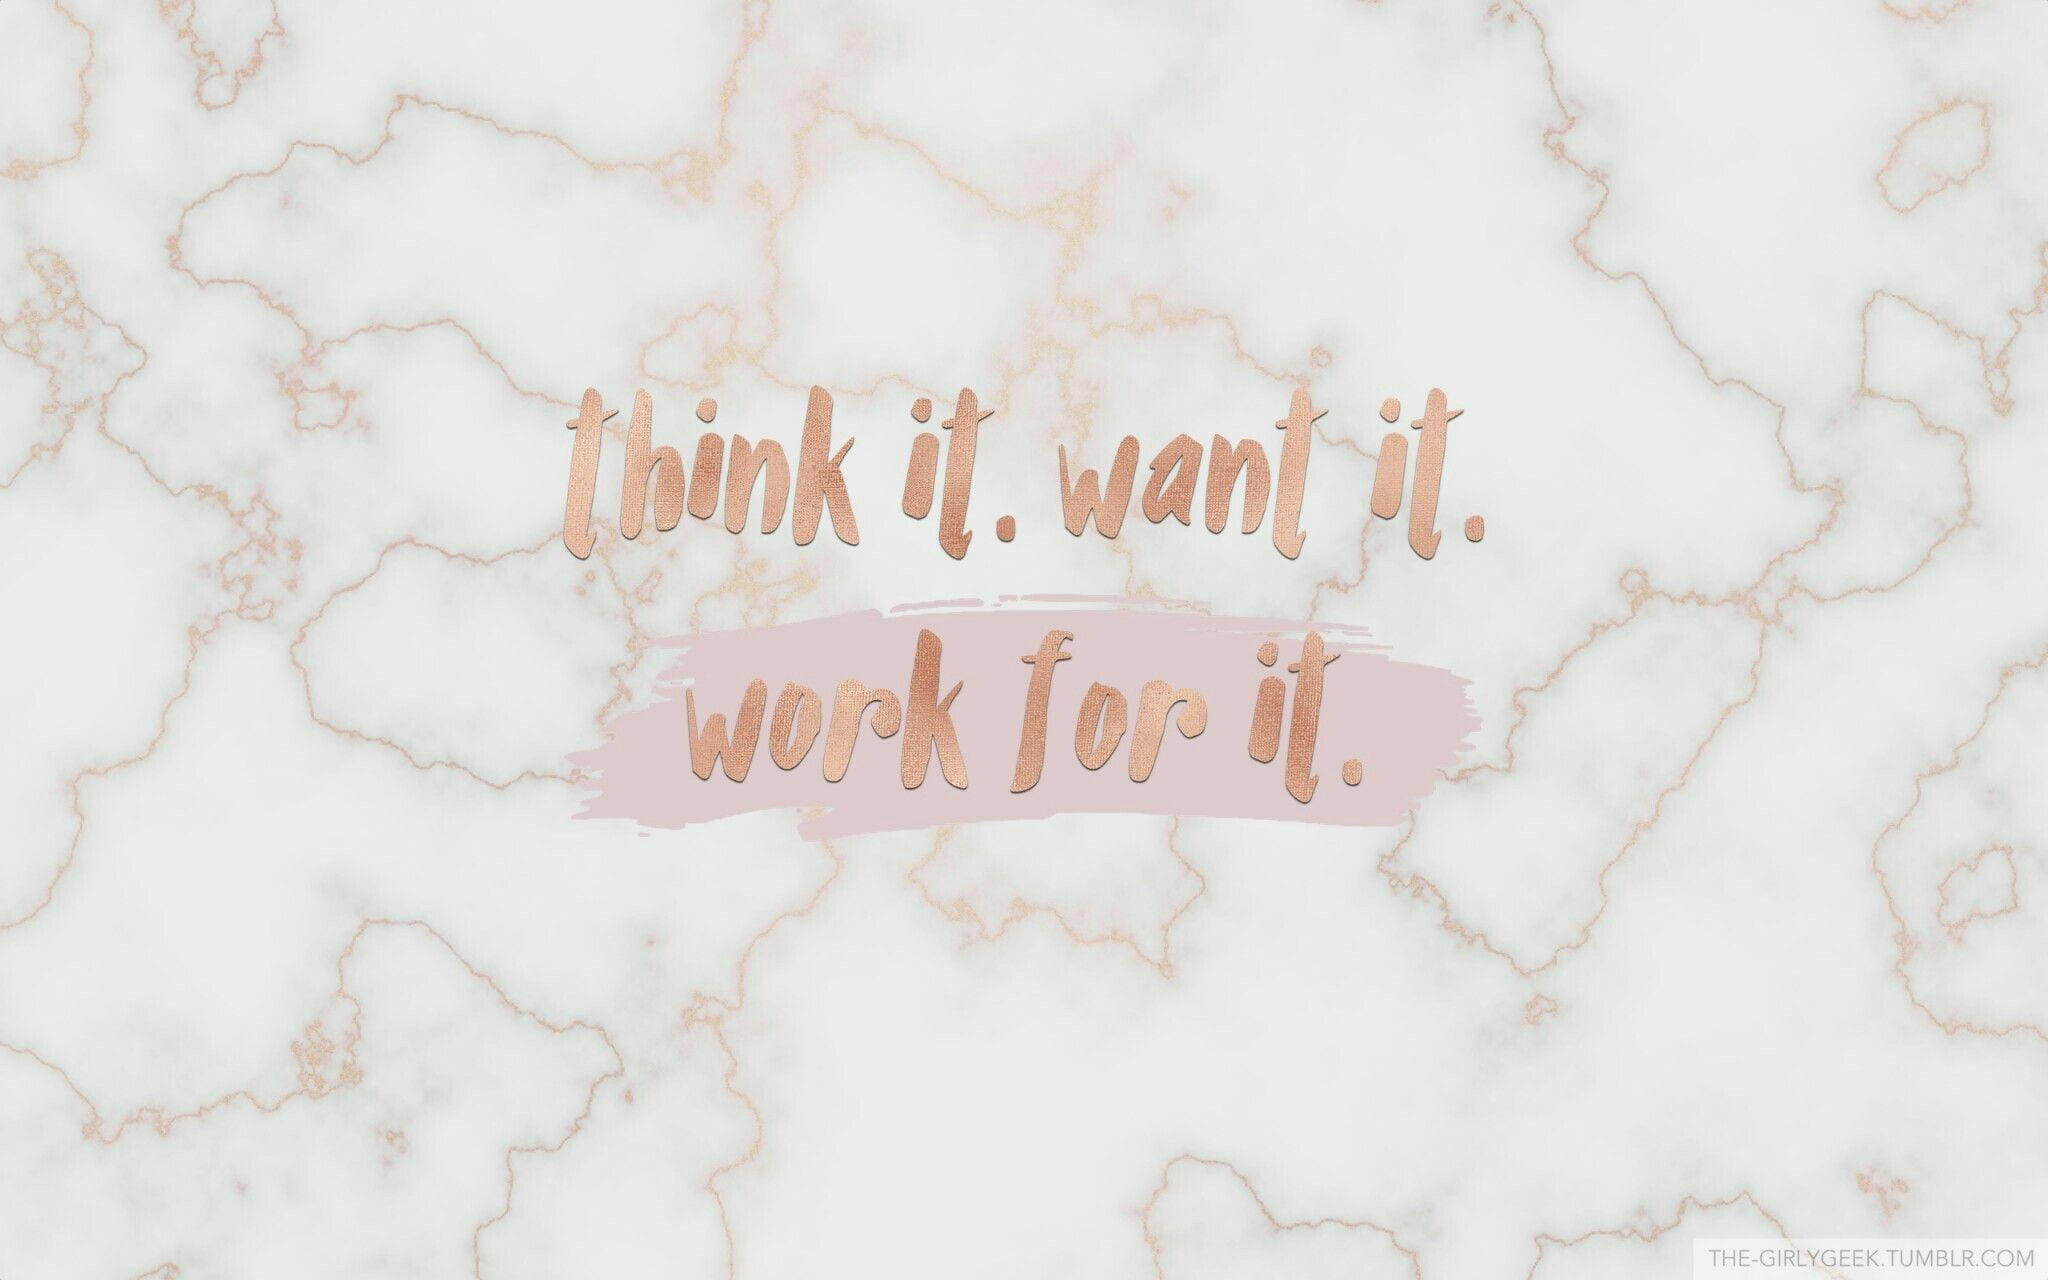 Rose Gold Tumblr Work For It Background